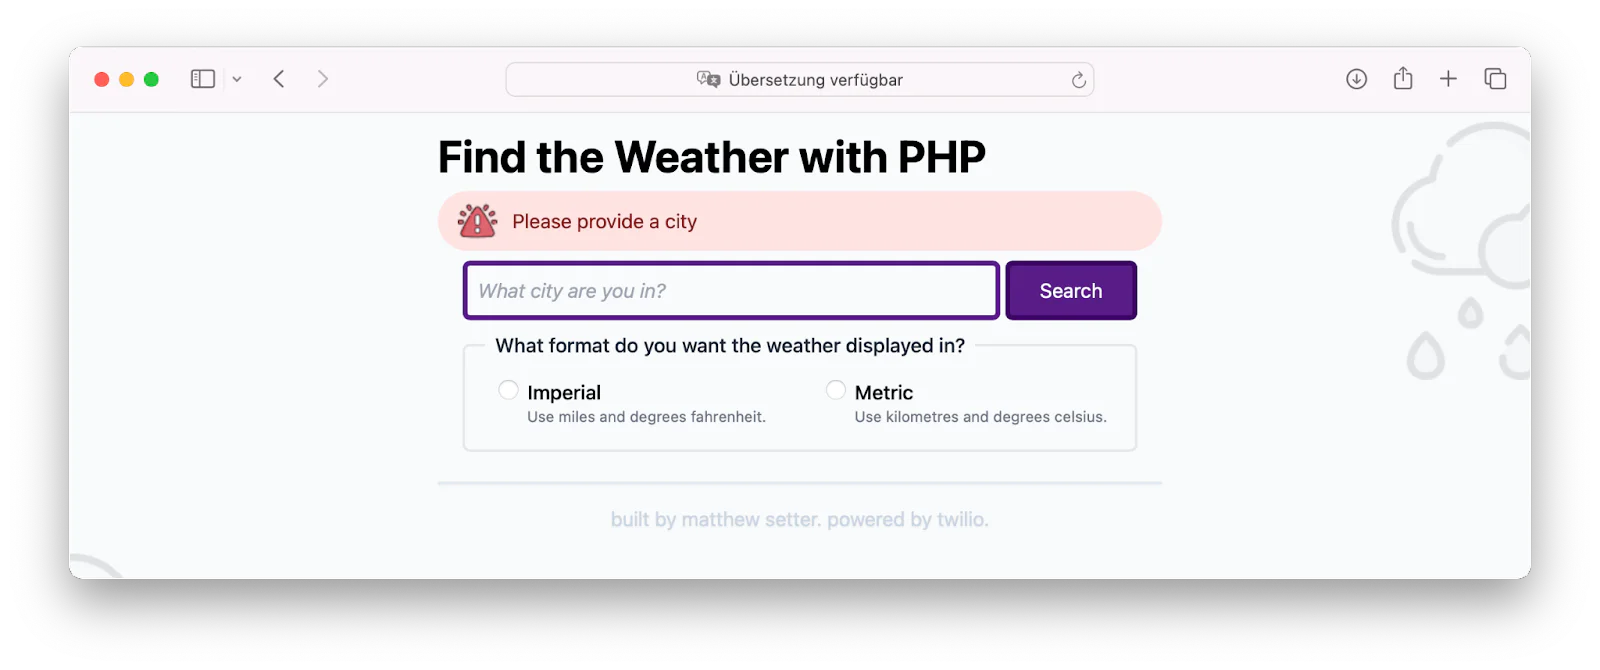 The PHP weather application, rendered in the Safari web browser, showing an error message because no city was provided.